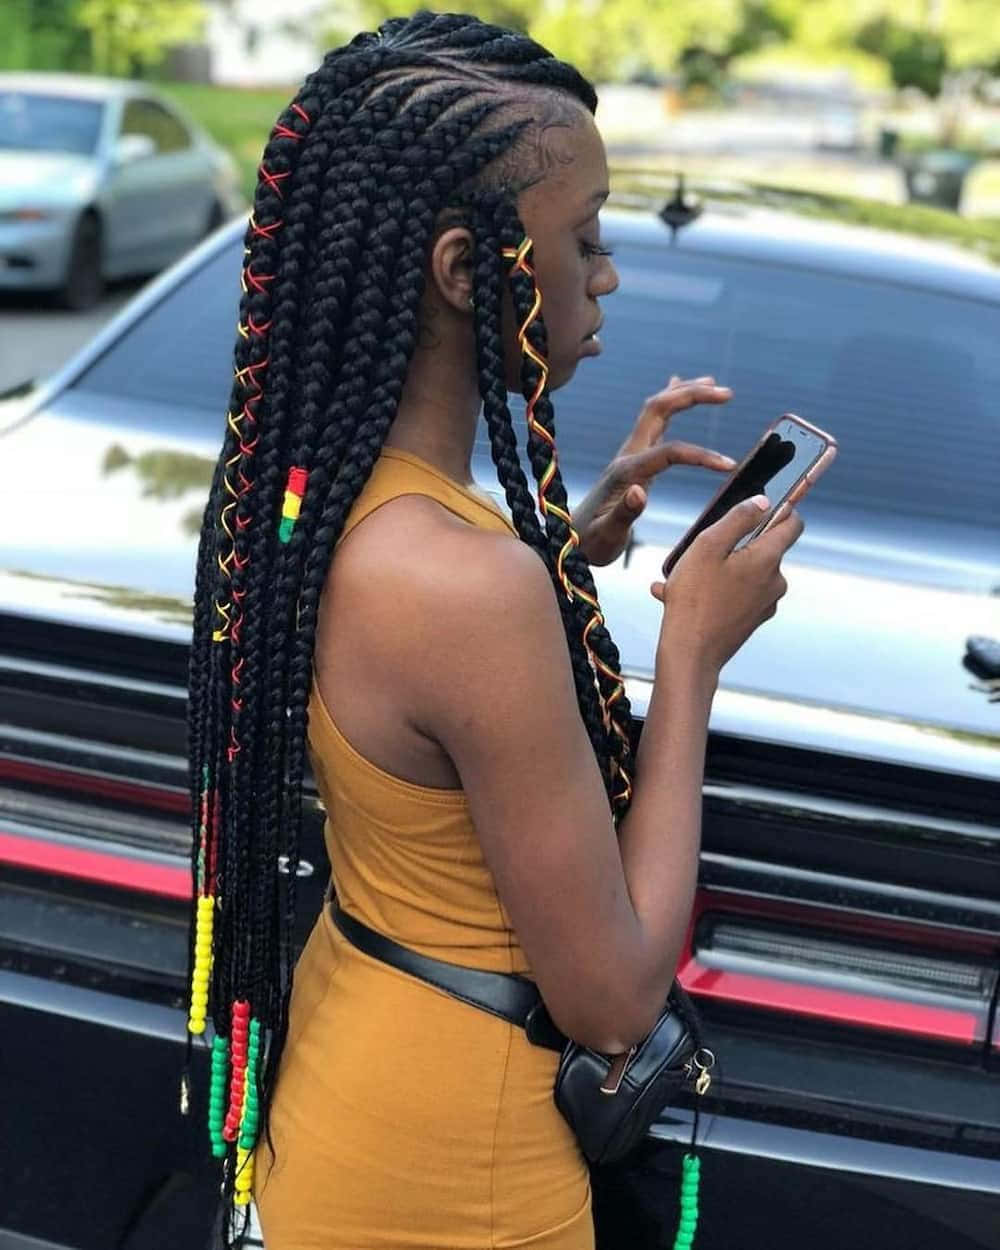 A Woman With Long Braids Is Looking At Her Phone